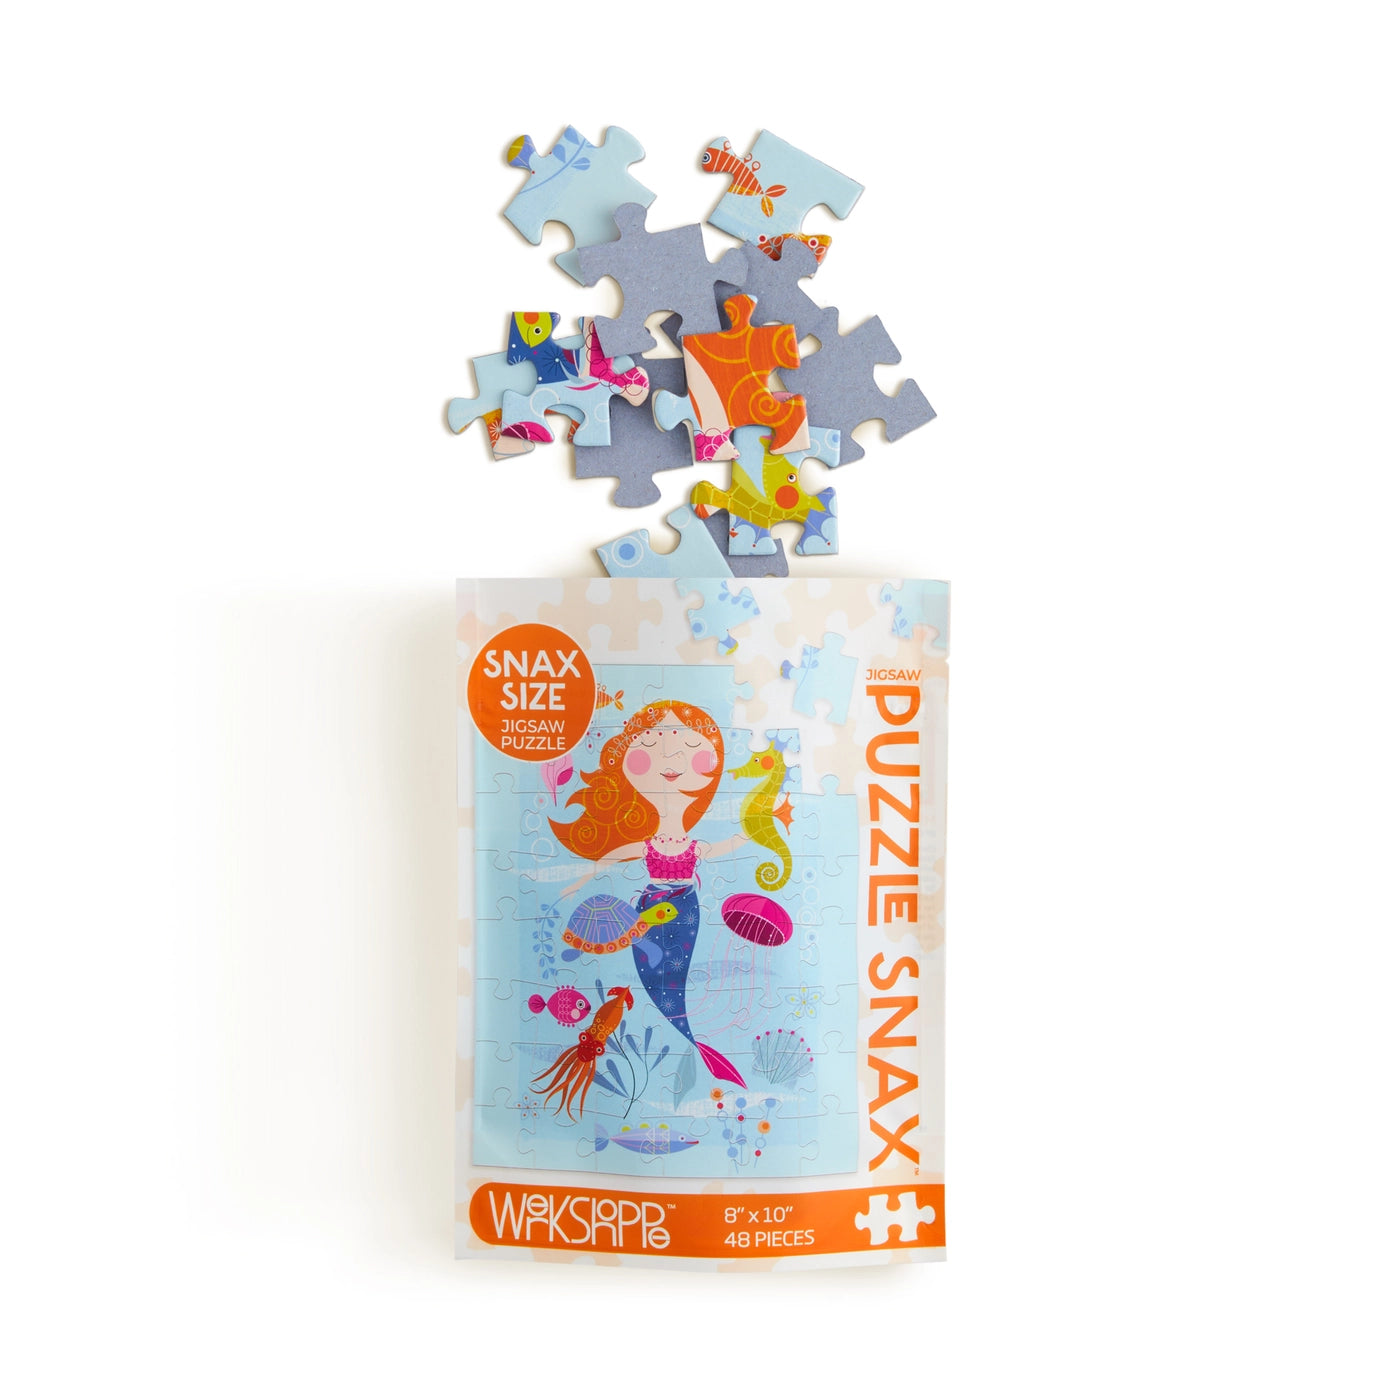 Mermaid and Friends | 48 Piece Jigsaw Puzzle